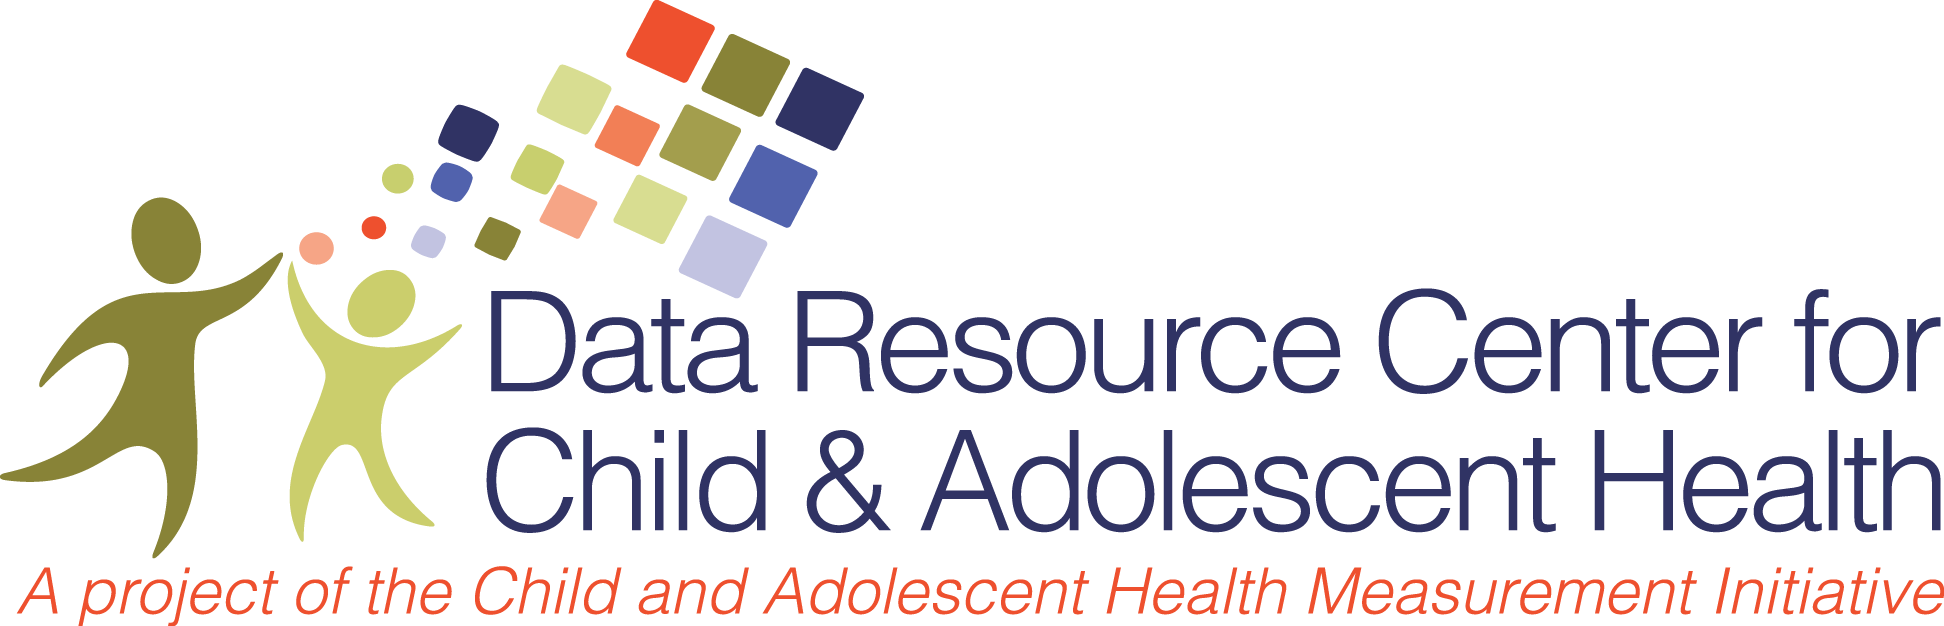 Logo of Data Resource Center for Child & Adolescent Health: A Project of the Child and Adolescent Health Measurement Initiative